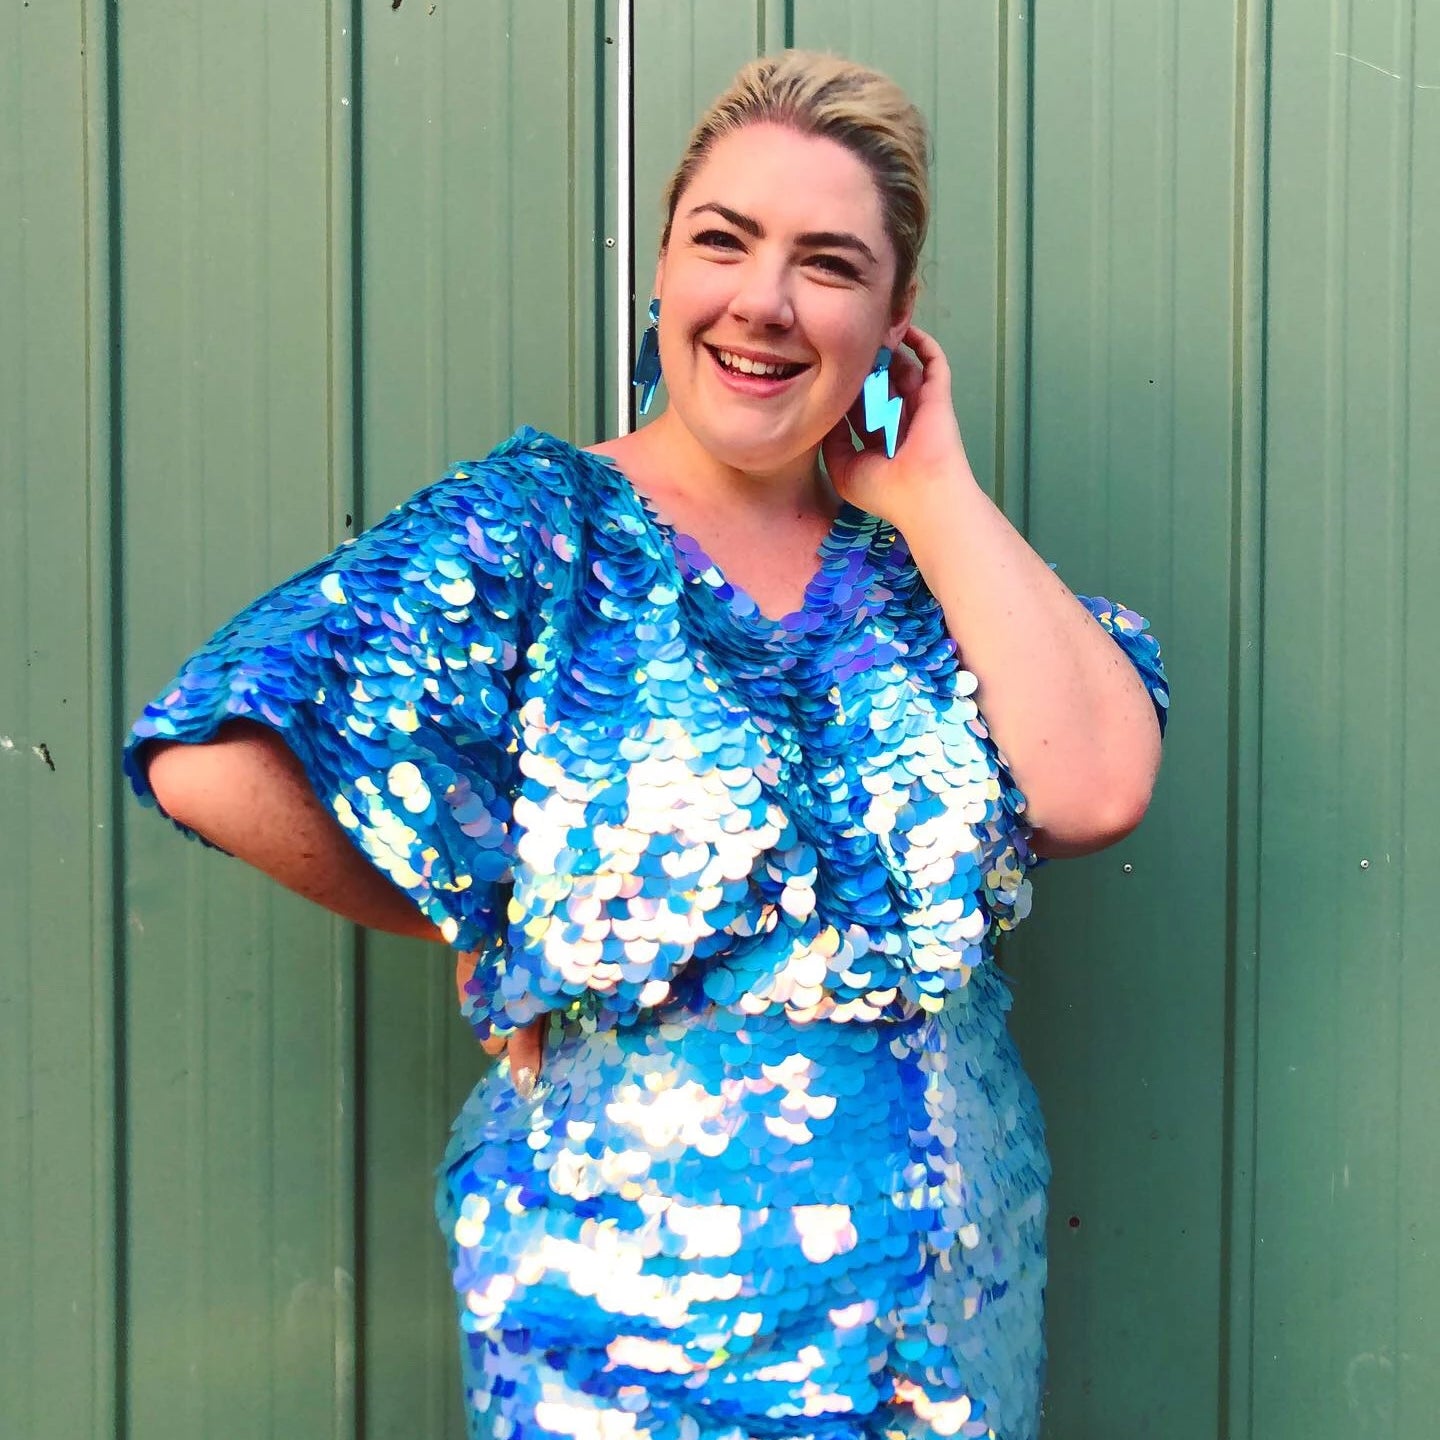 A woman in a blue sequin outfit poses against a green backdrop